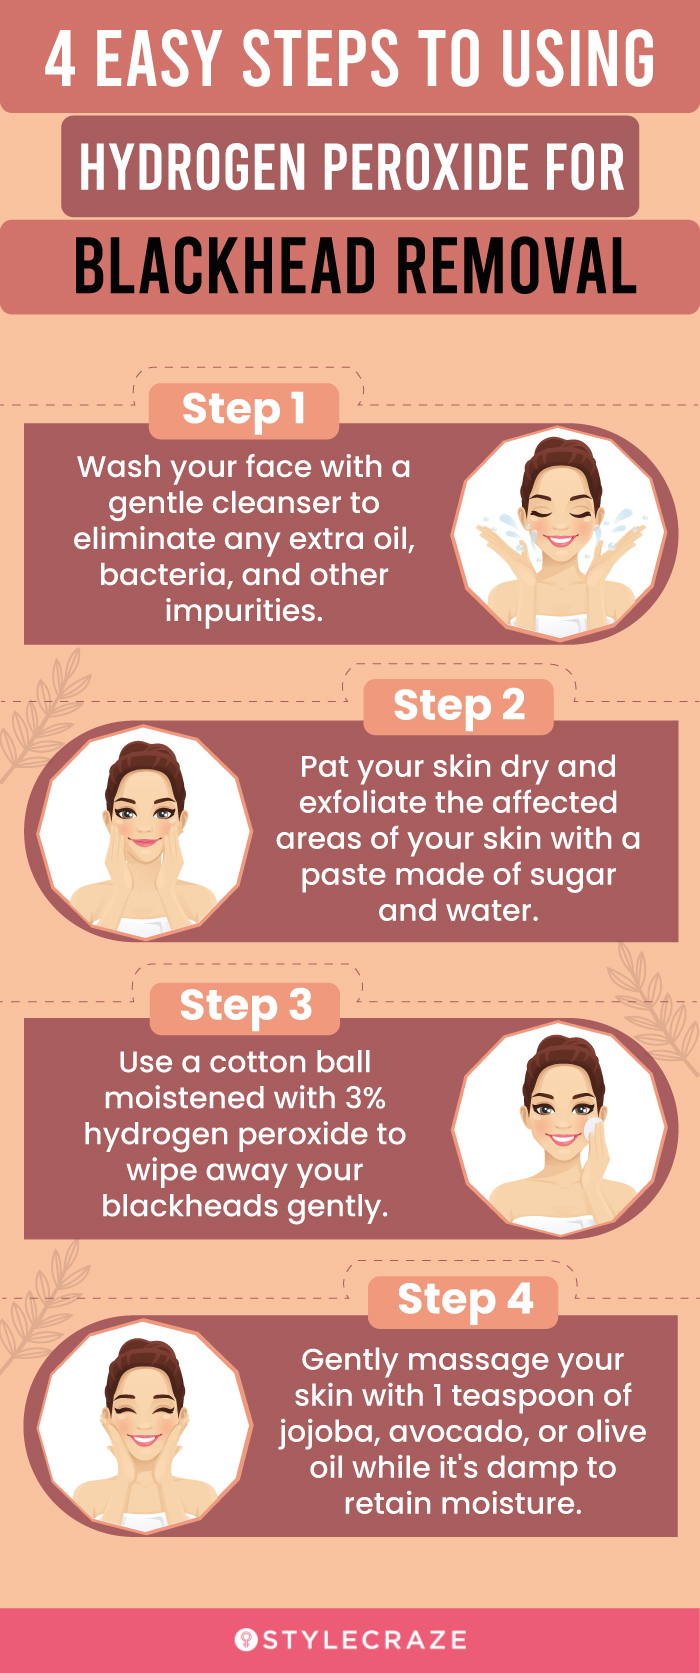 4 easy steps to using hydrogen peroxide for blackhead removal (infographic)